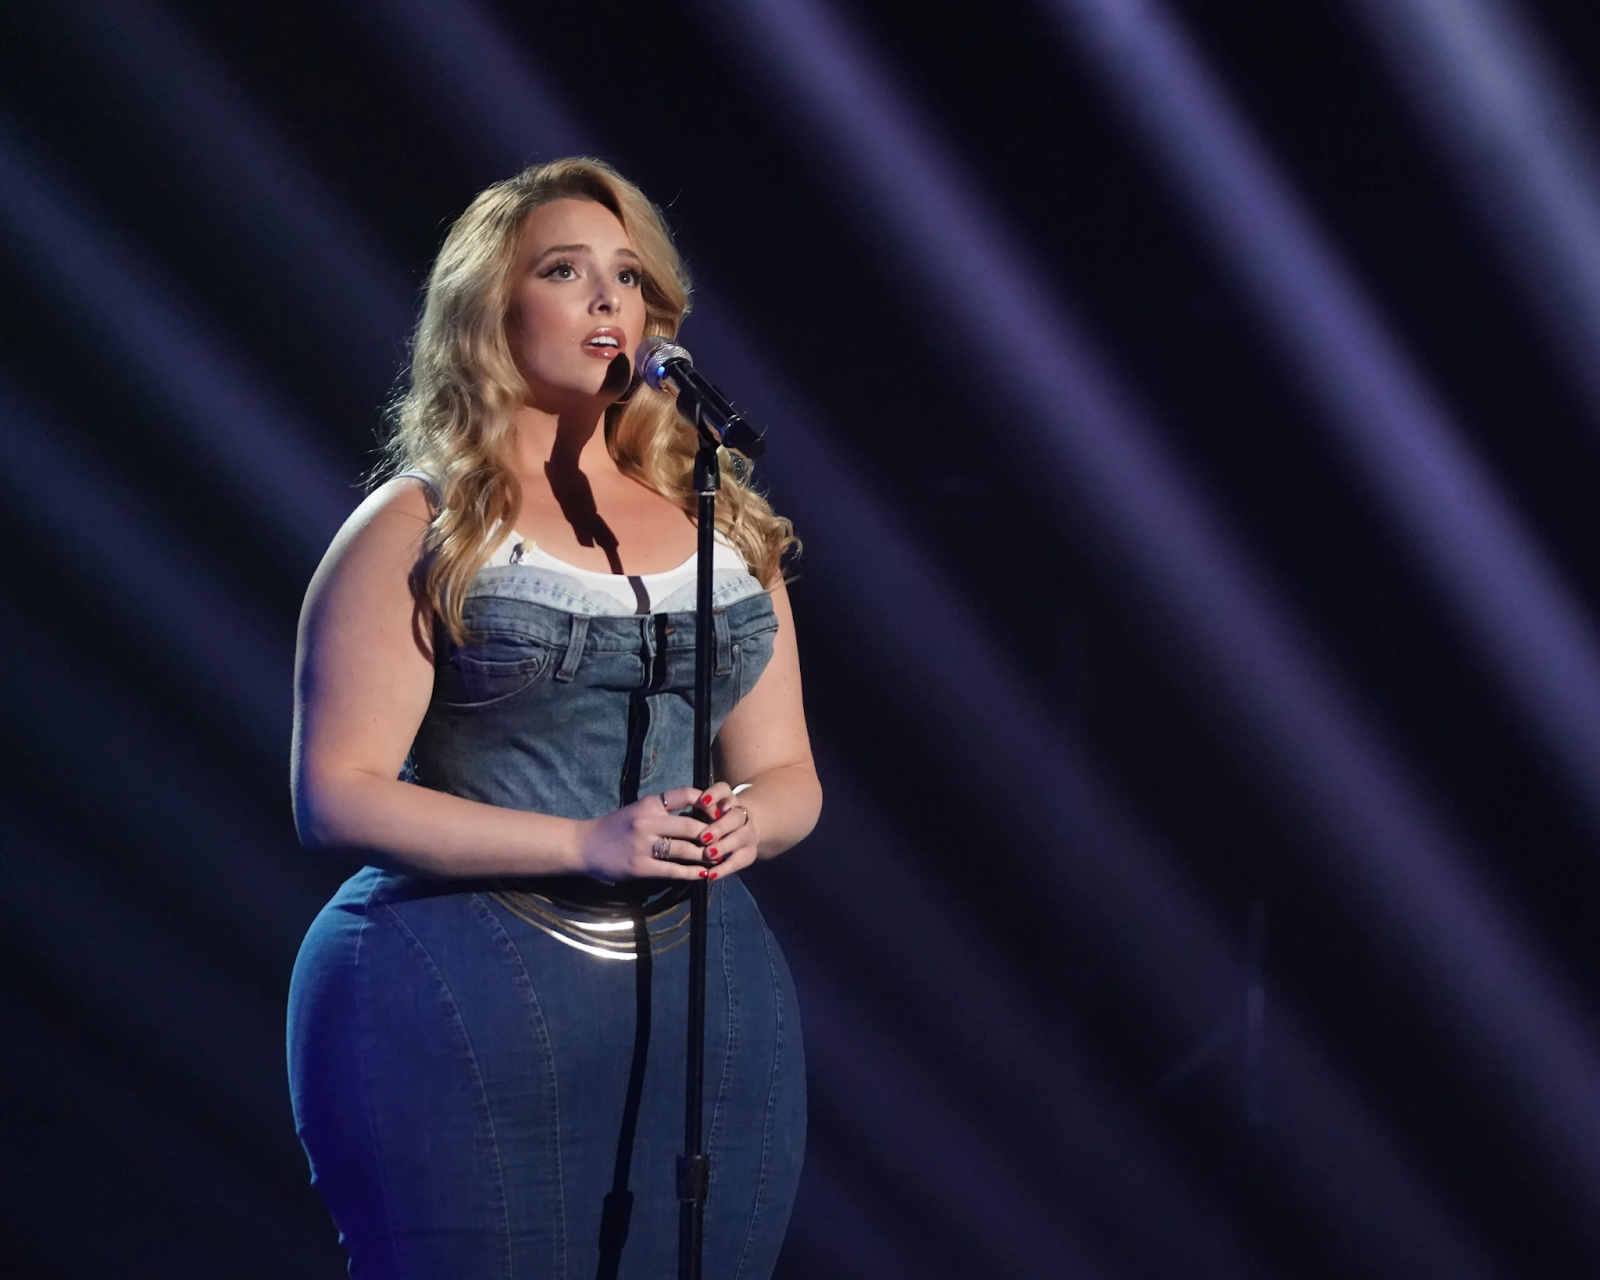 Grace Kinstler makes top 5 after 'American Idol' Mother's Day episode